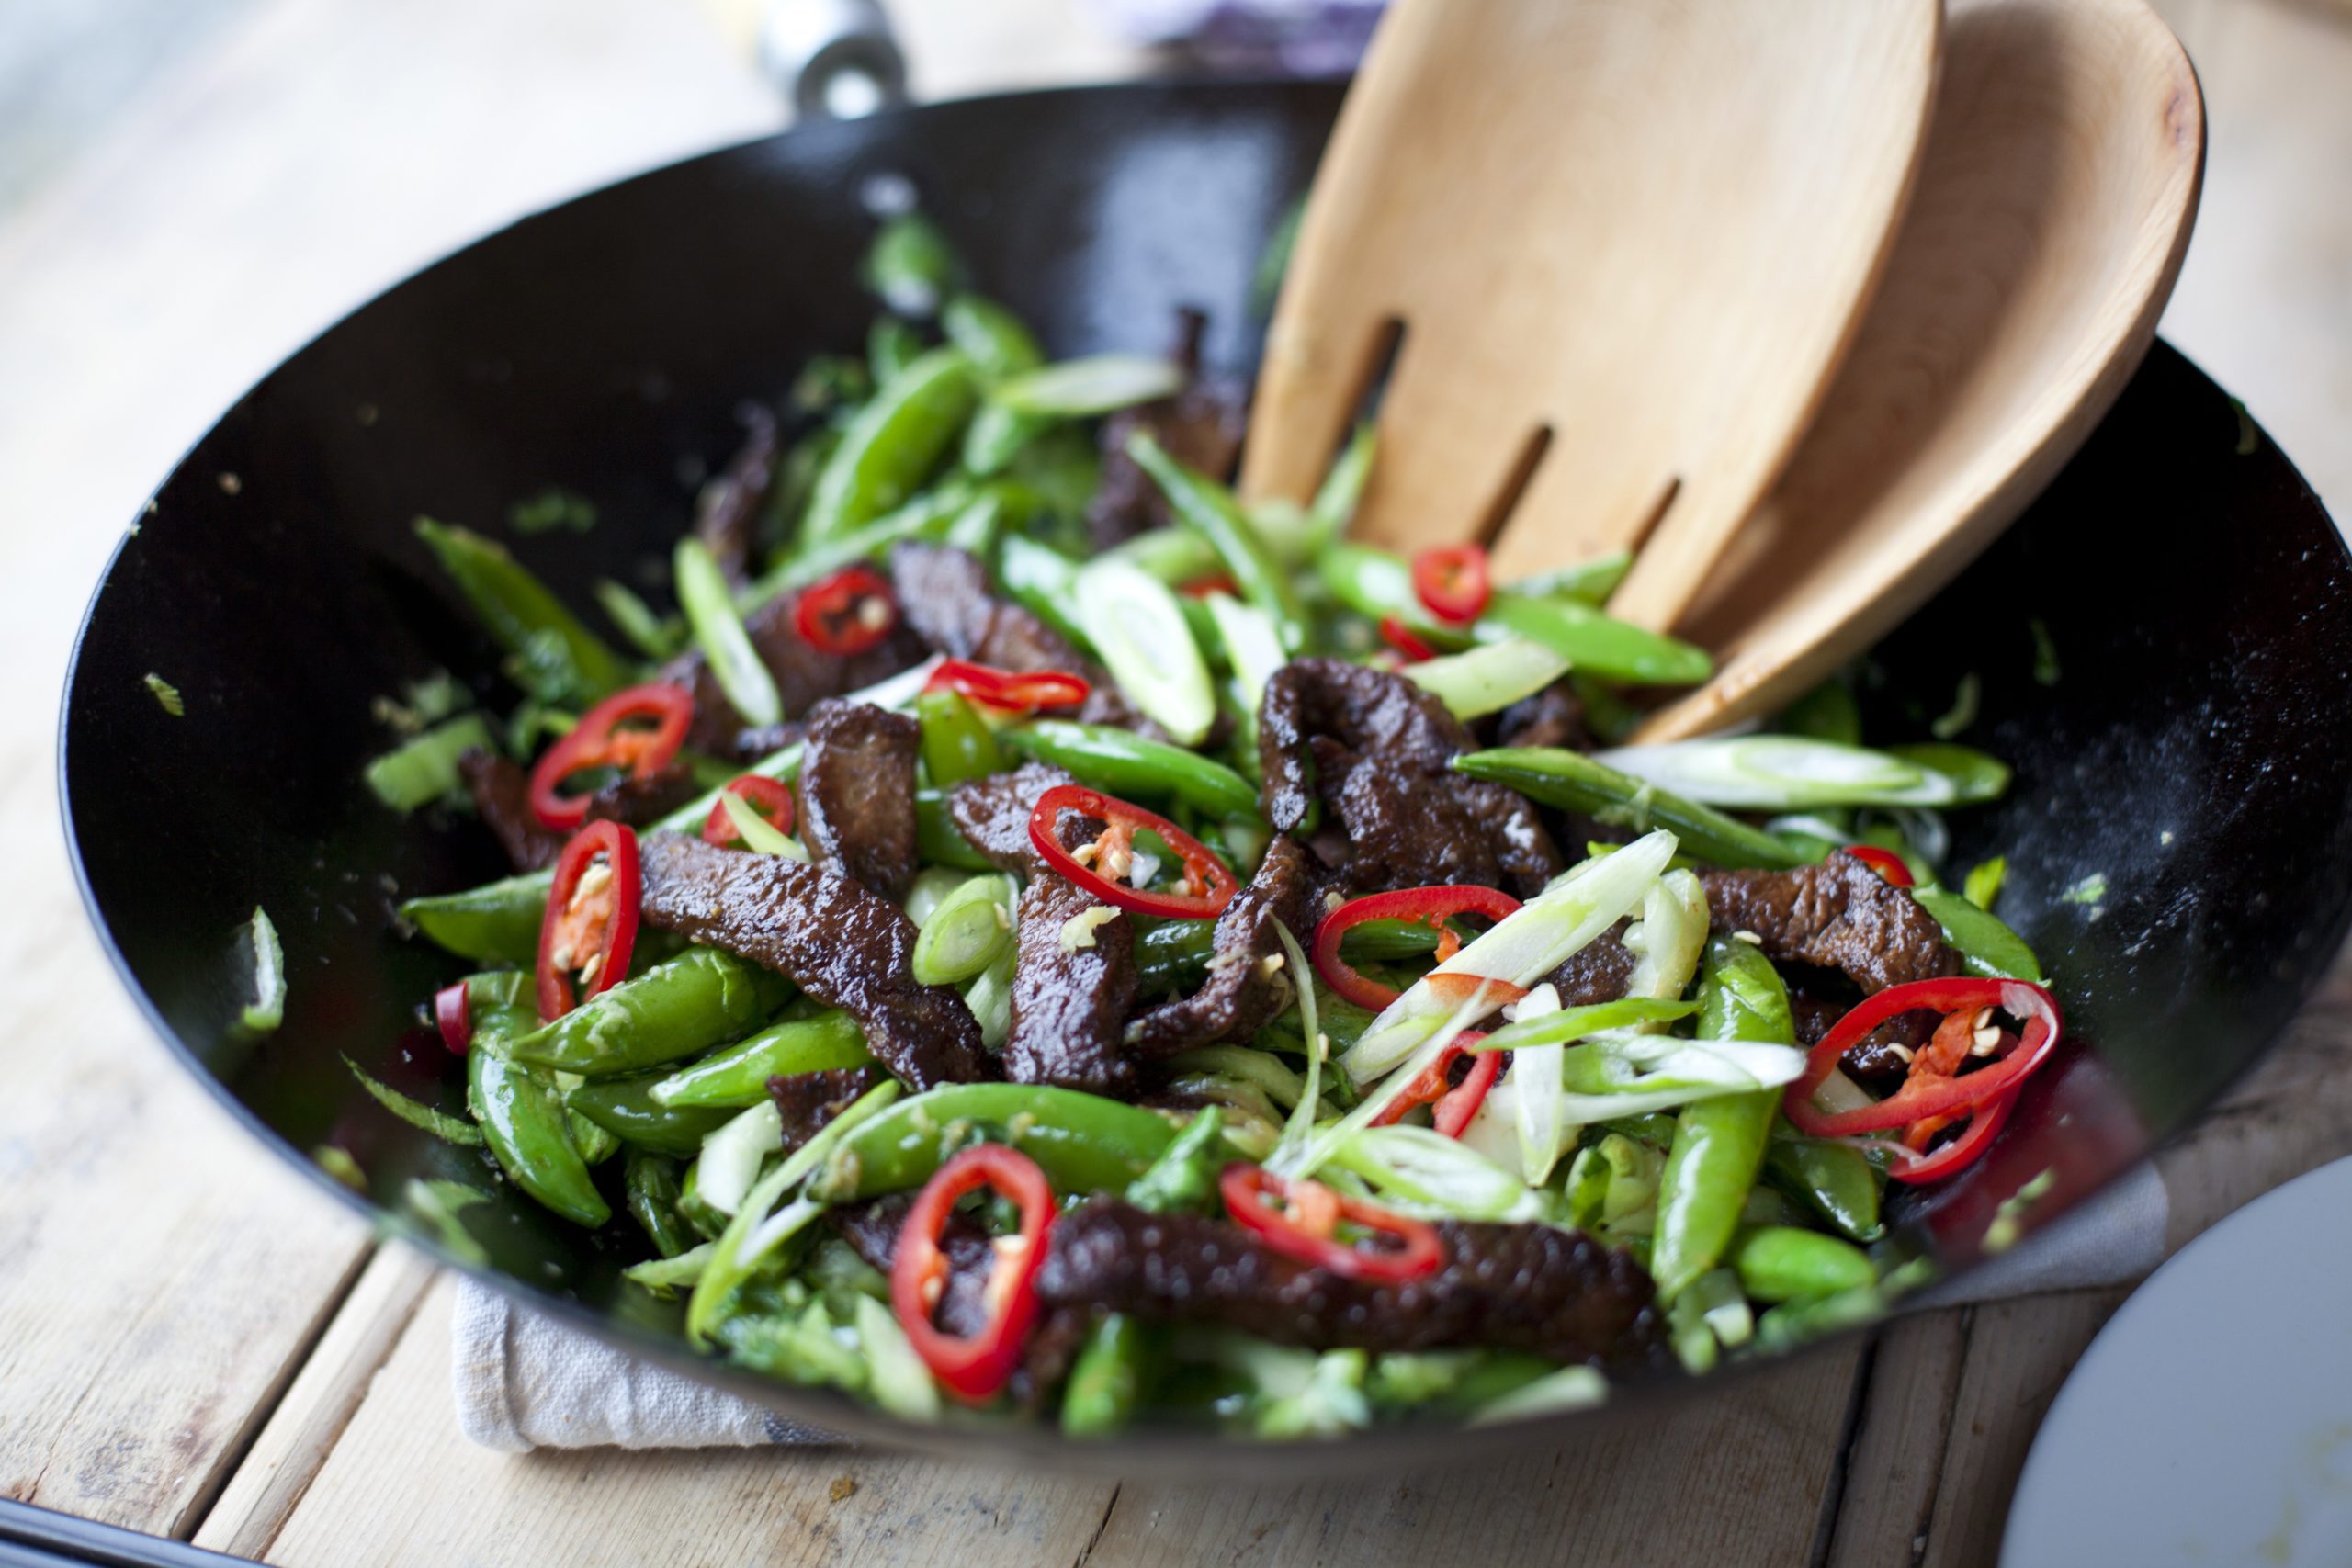 Stir-fried ginger beef with crunchy aromatic greens